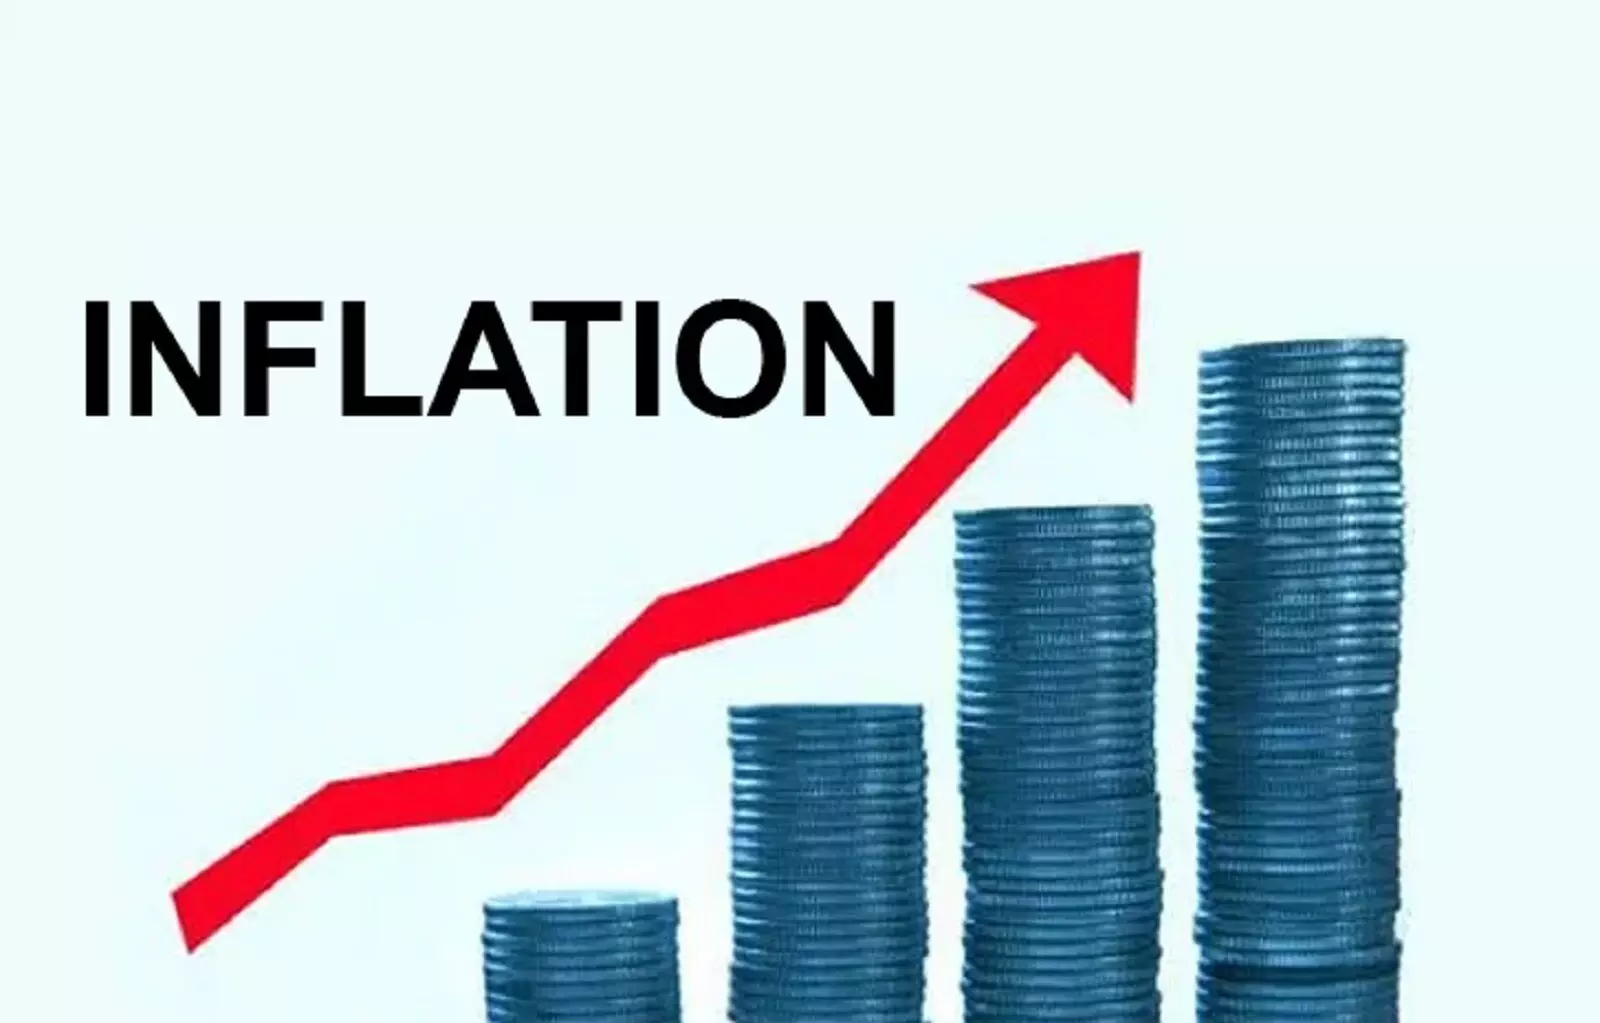 Expert says security, other factors key to tackling high inflation rate